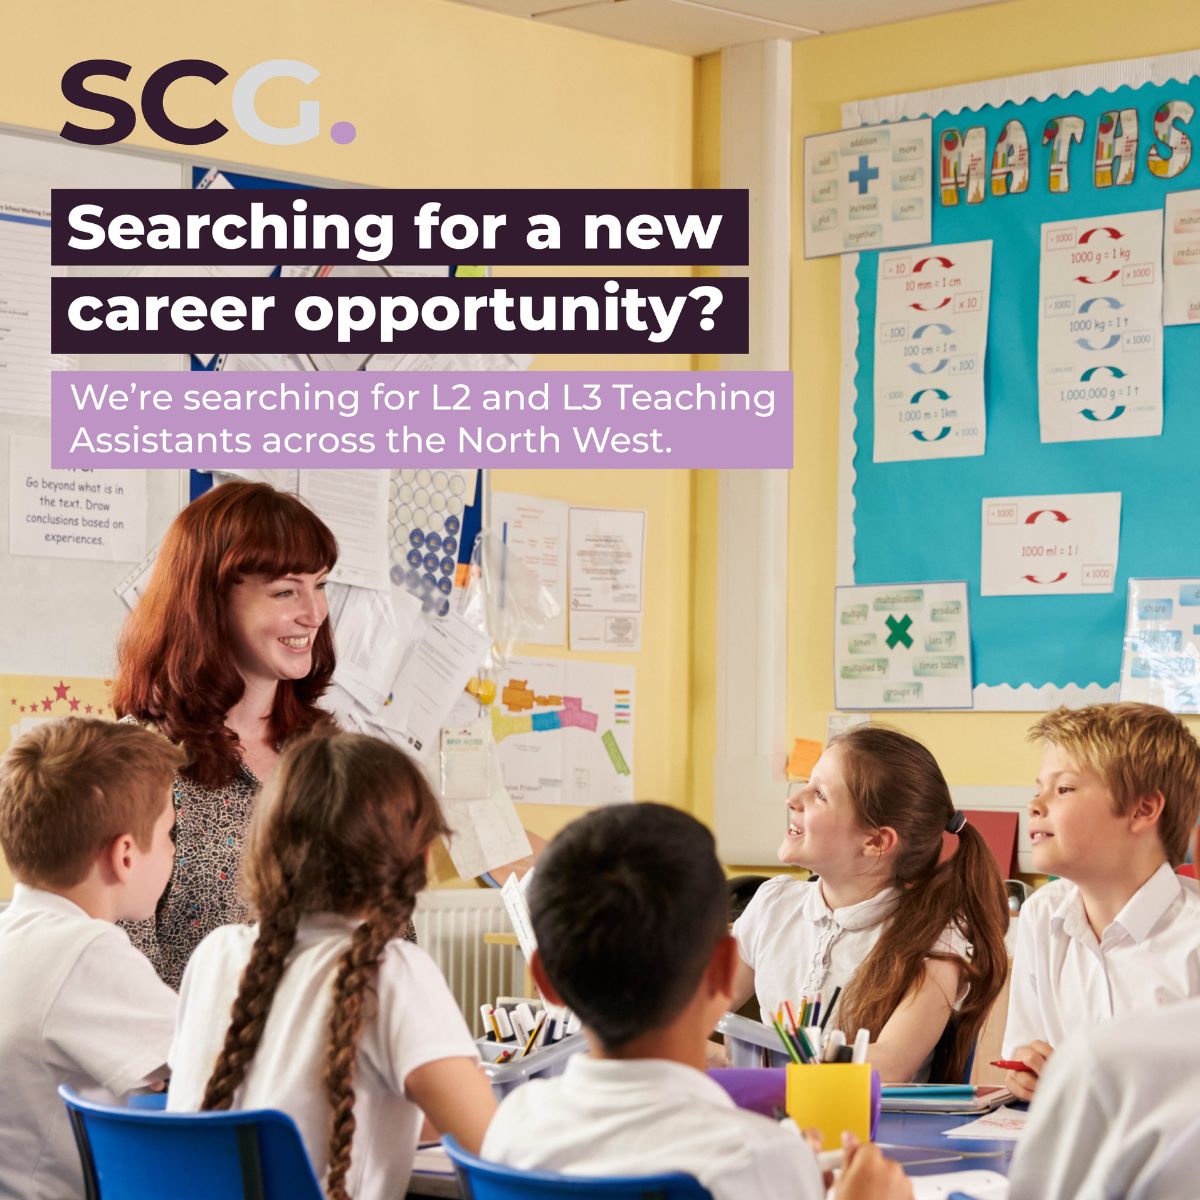 Are you a Teaching Assistant seeking a new job opportunity? 👀 Get in touch with one of our consultants today! • Jimmy Callagher | jc@spencerclarkegroup.co.uk • Joseph Chanter | jmc@spencerclarkegroup.co.uk • Jolie Moon | jmo@spencerclarkegroup.co.uk #teachingassistantjob